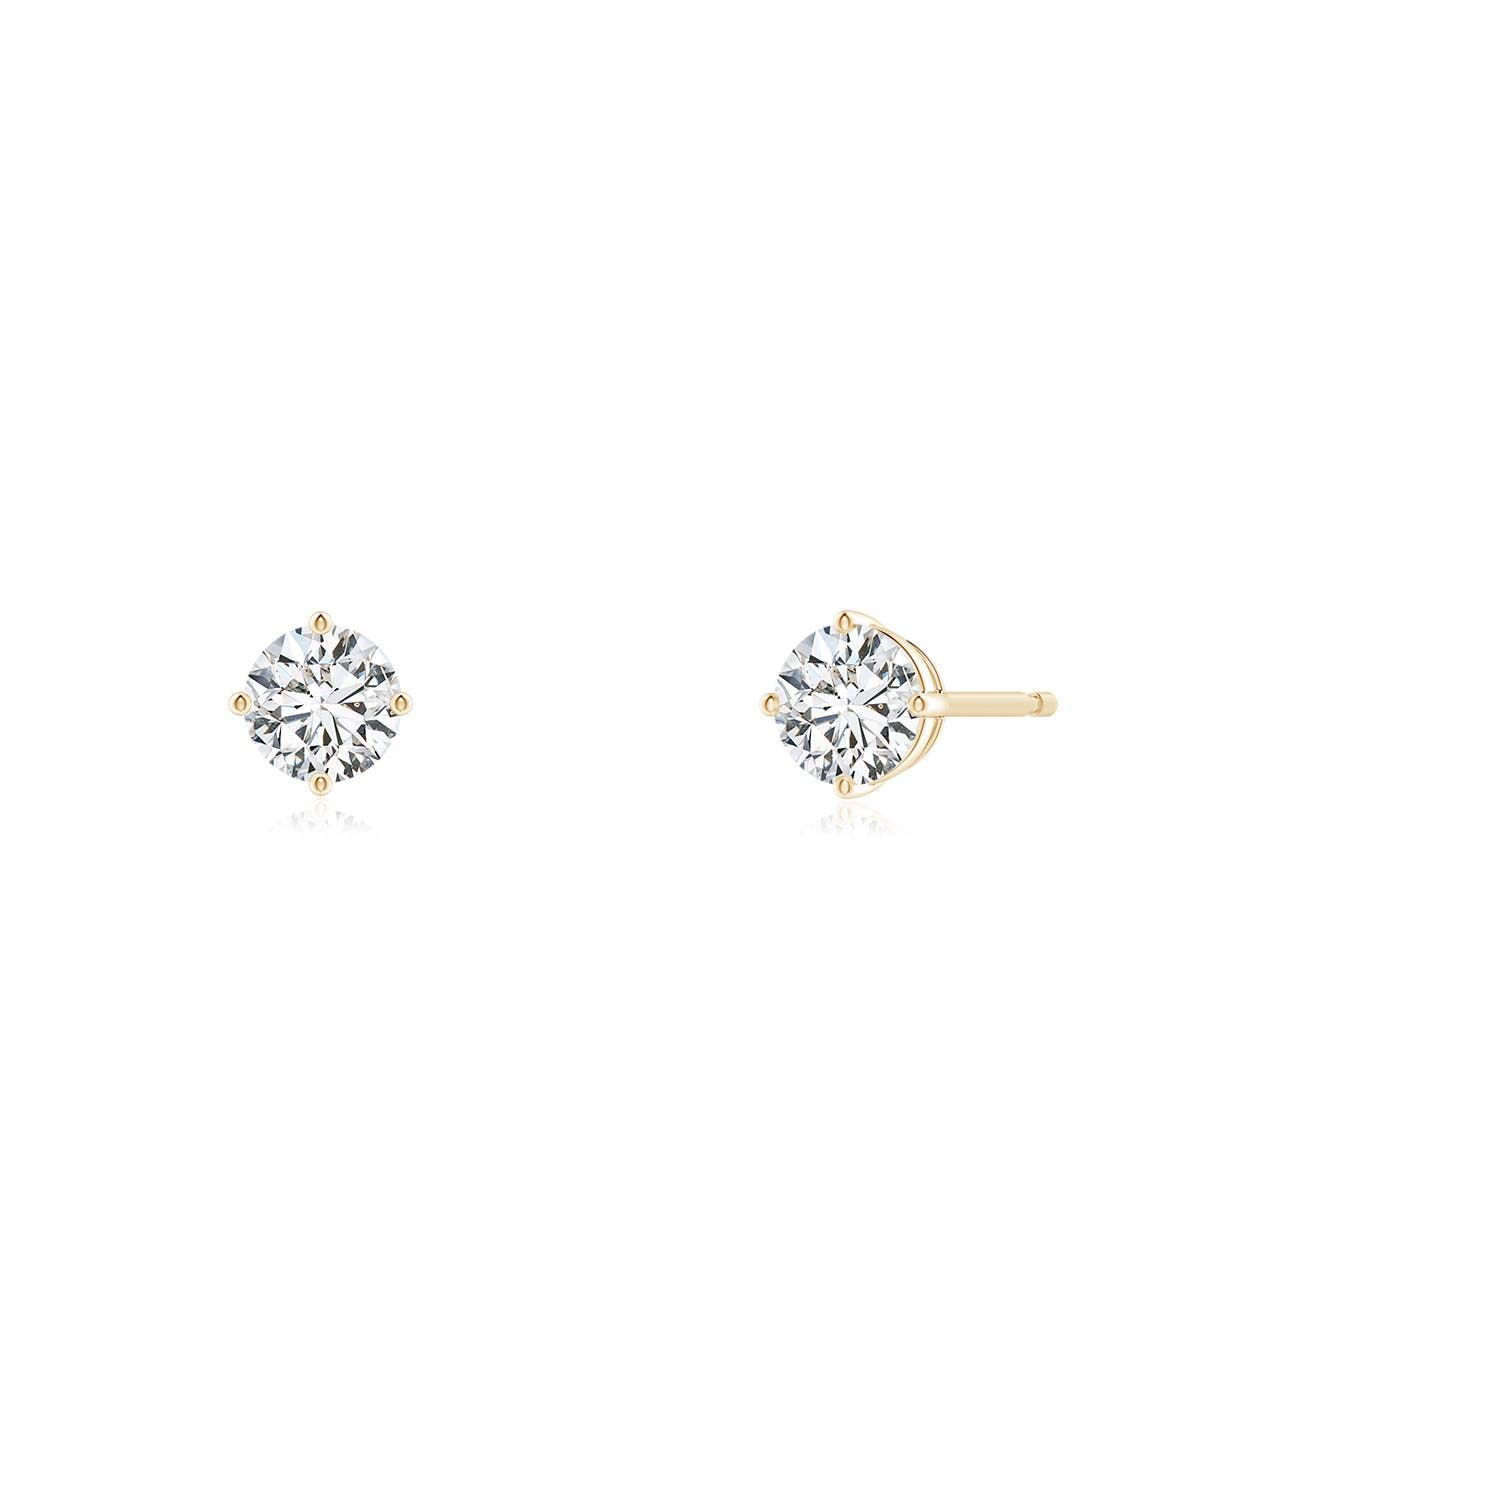 HSI2 / 0.32 CT / 14 KT Yellow Gold